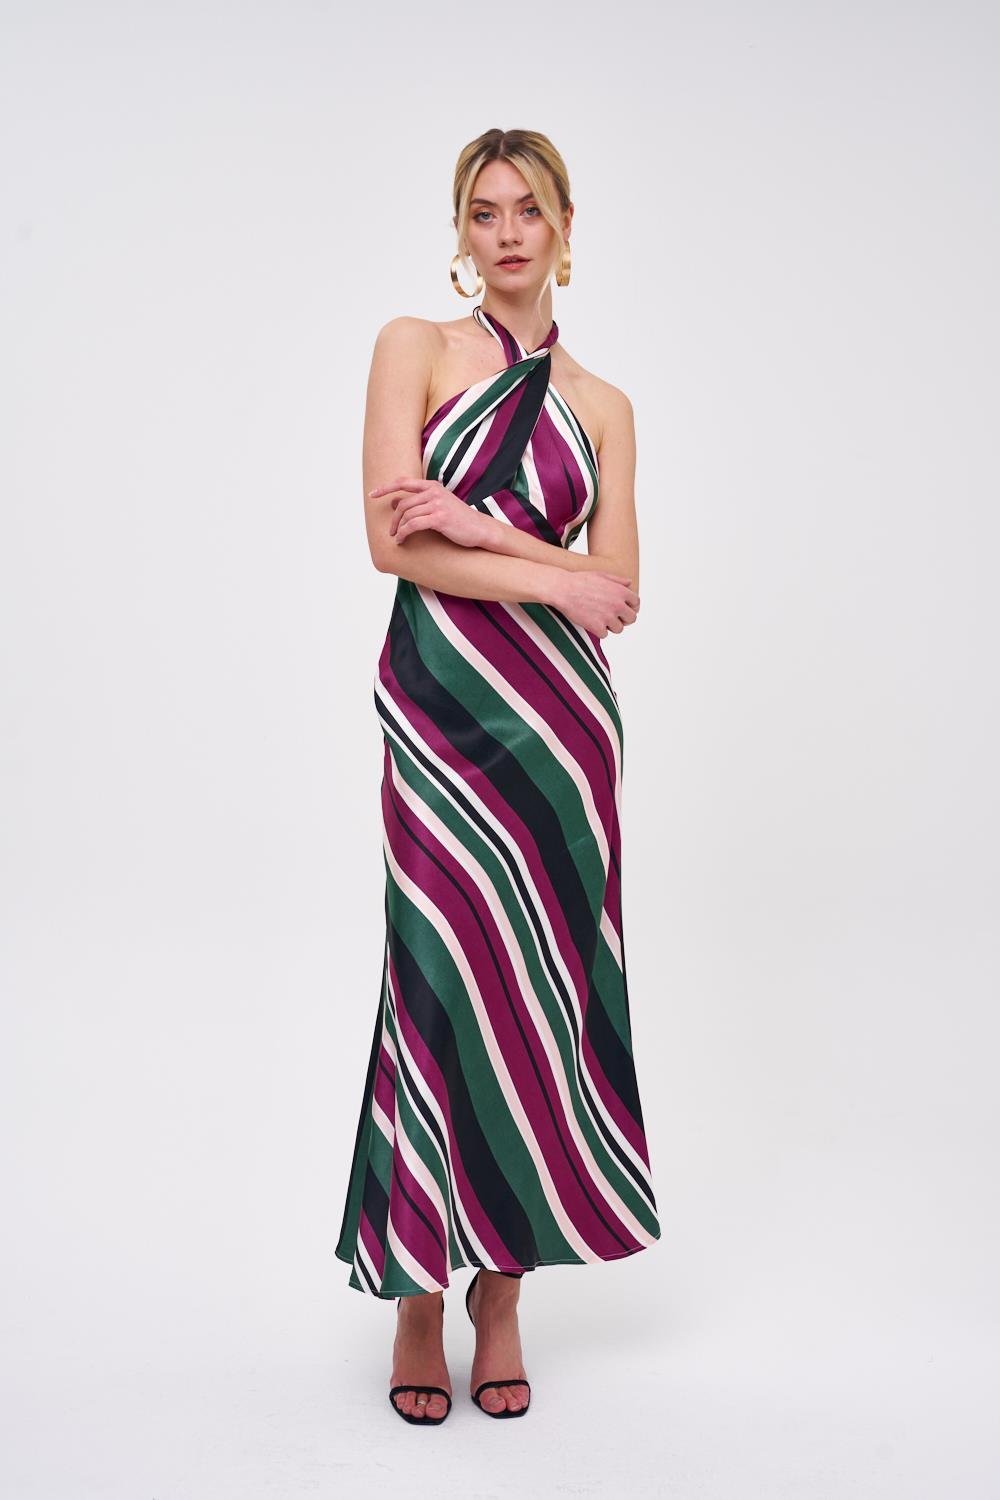 SATIN LONG DRESS WITH TIE AT THE NECK - Lebbse